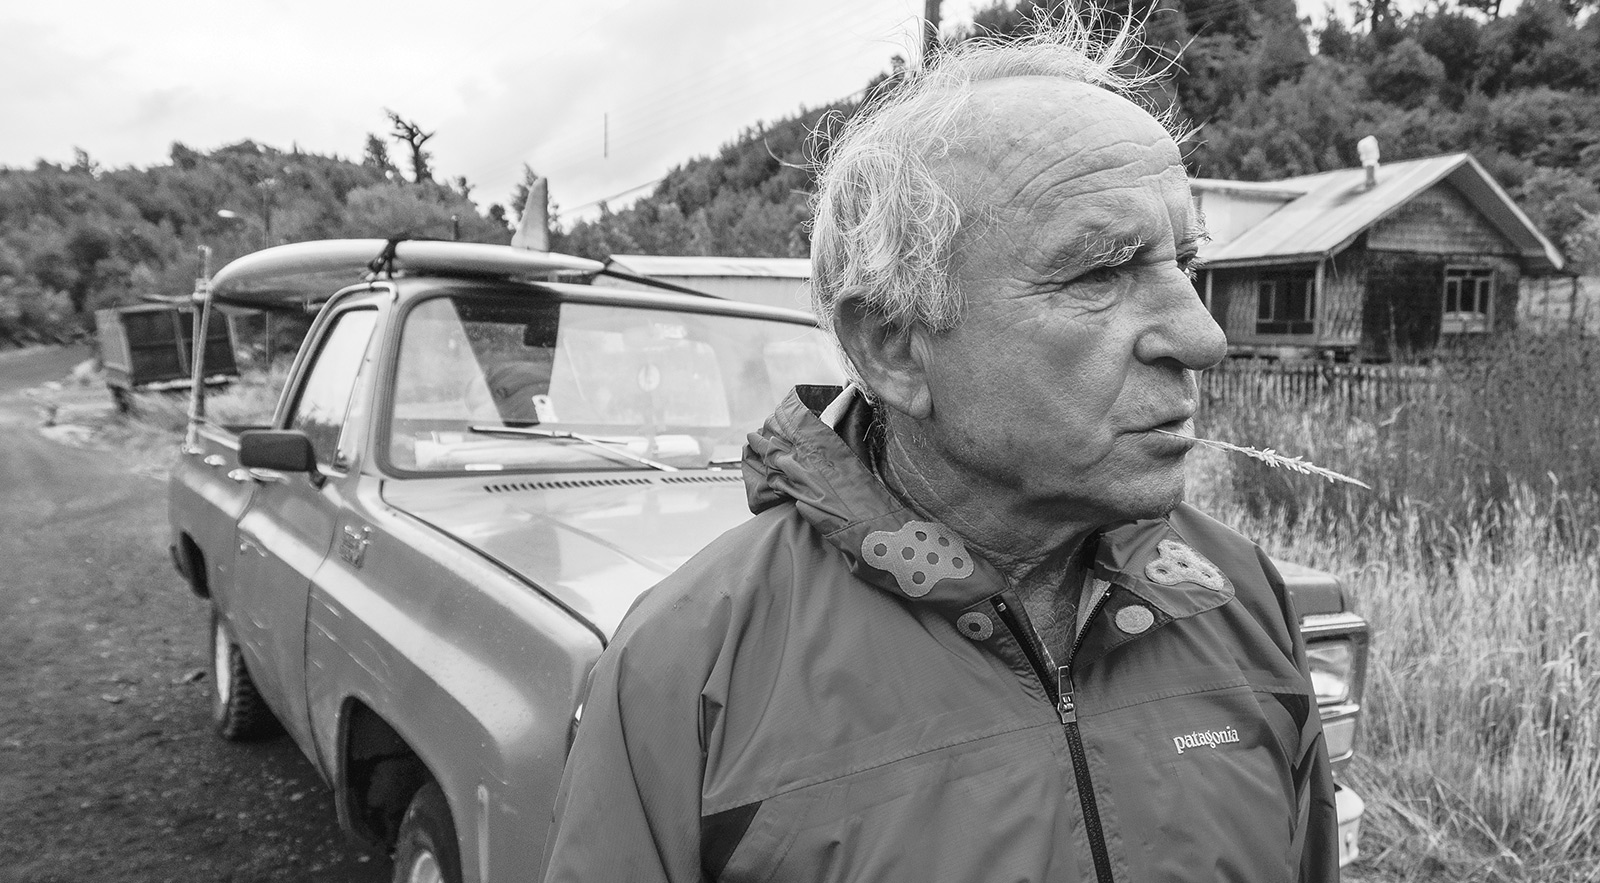 at Stake Is Future of Humankind - Patagonia